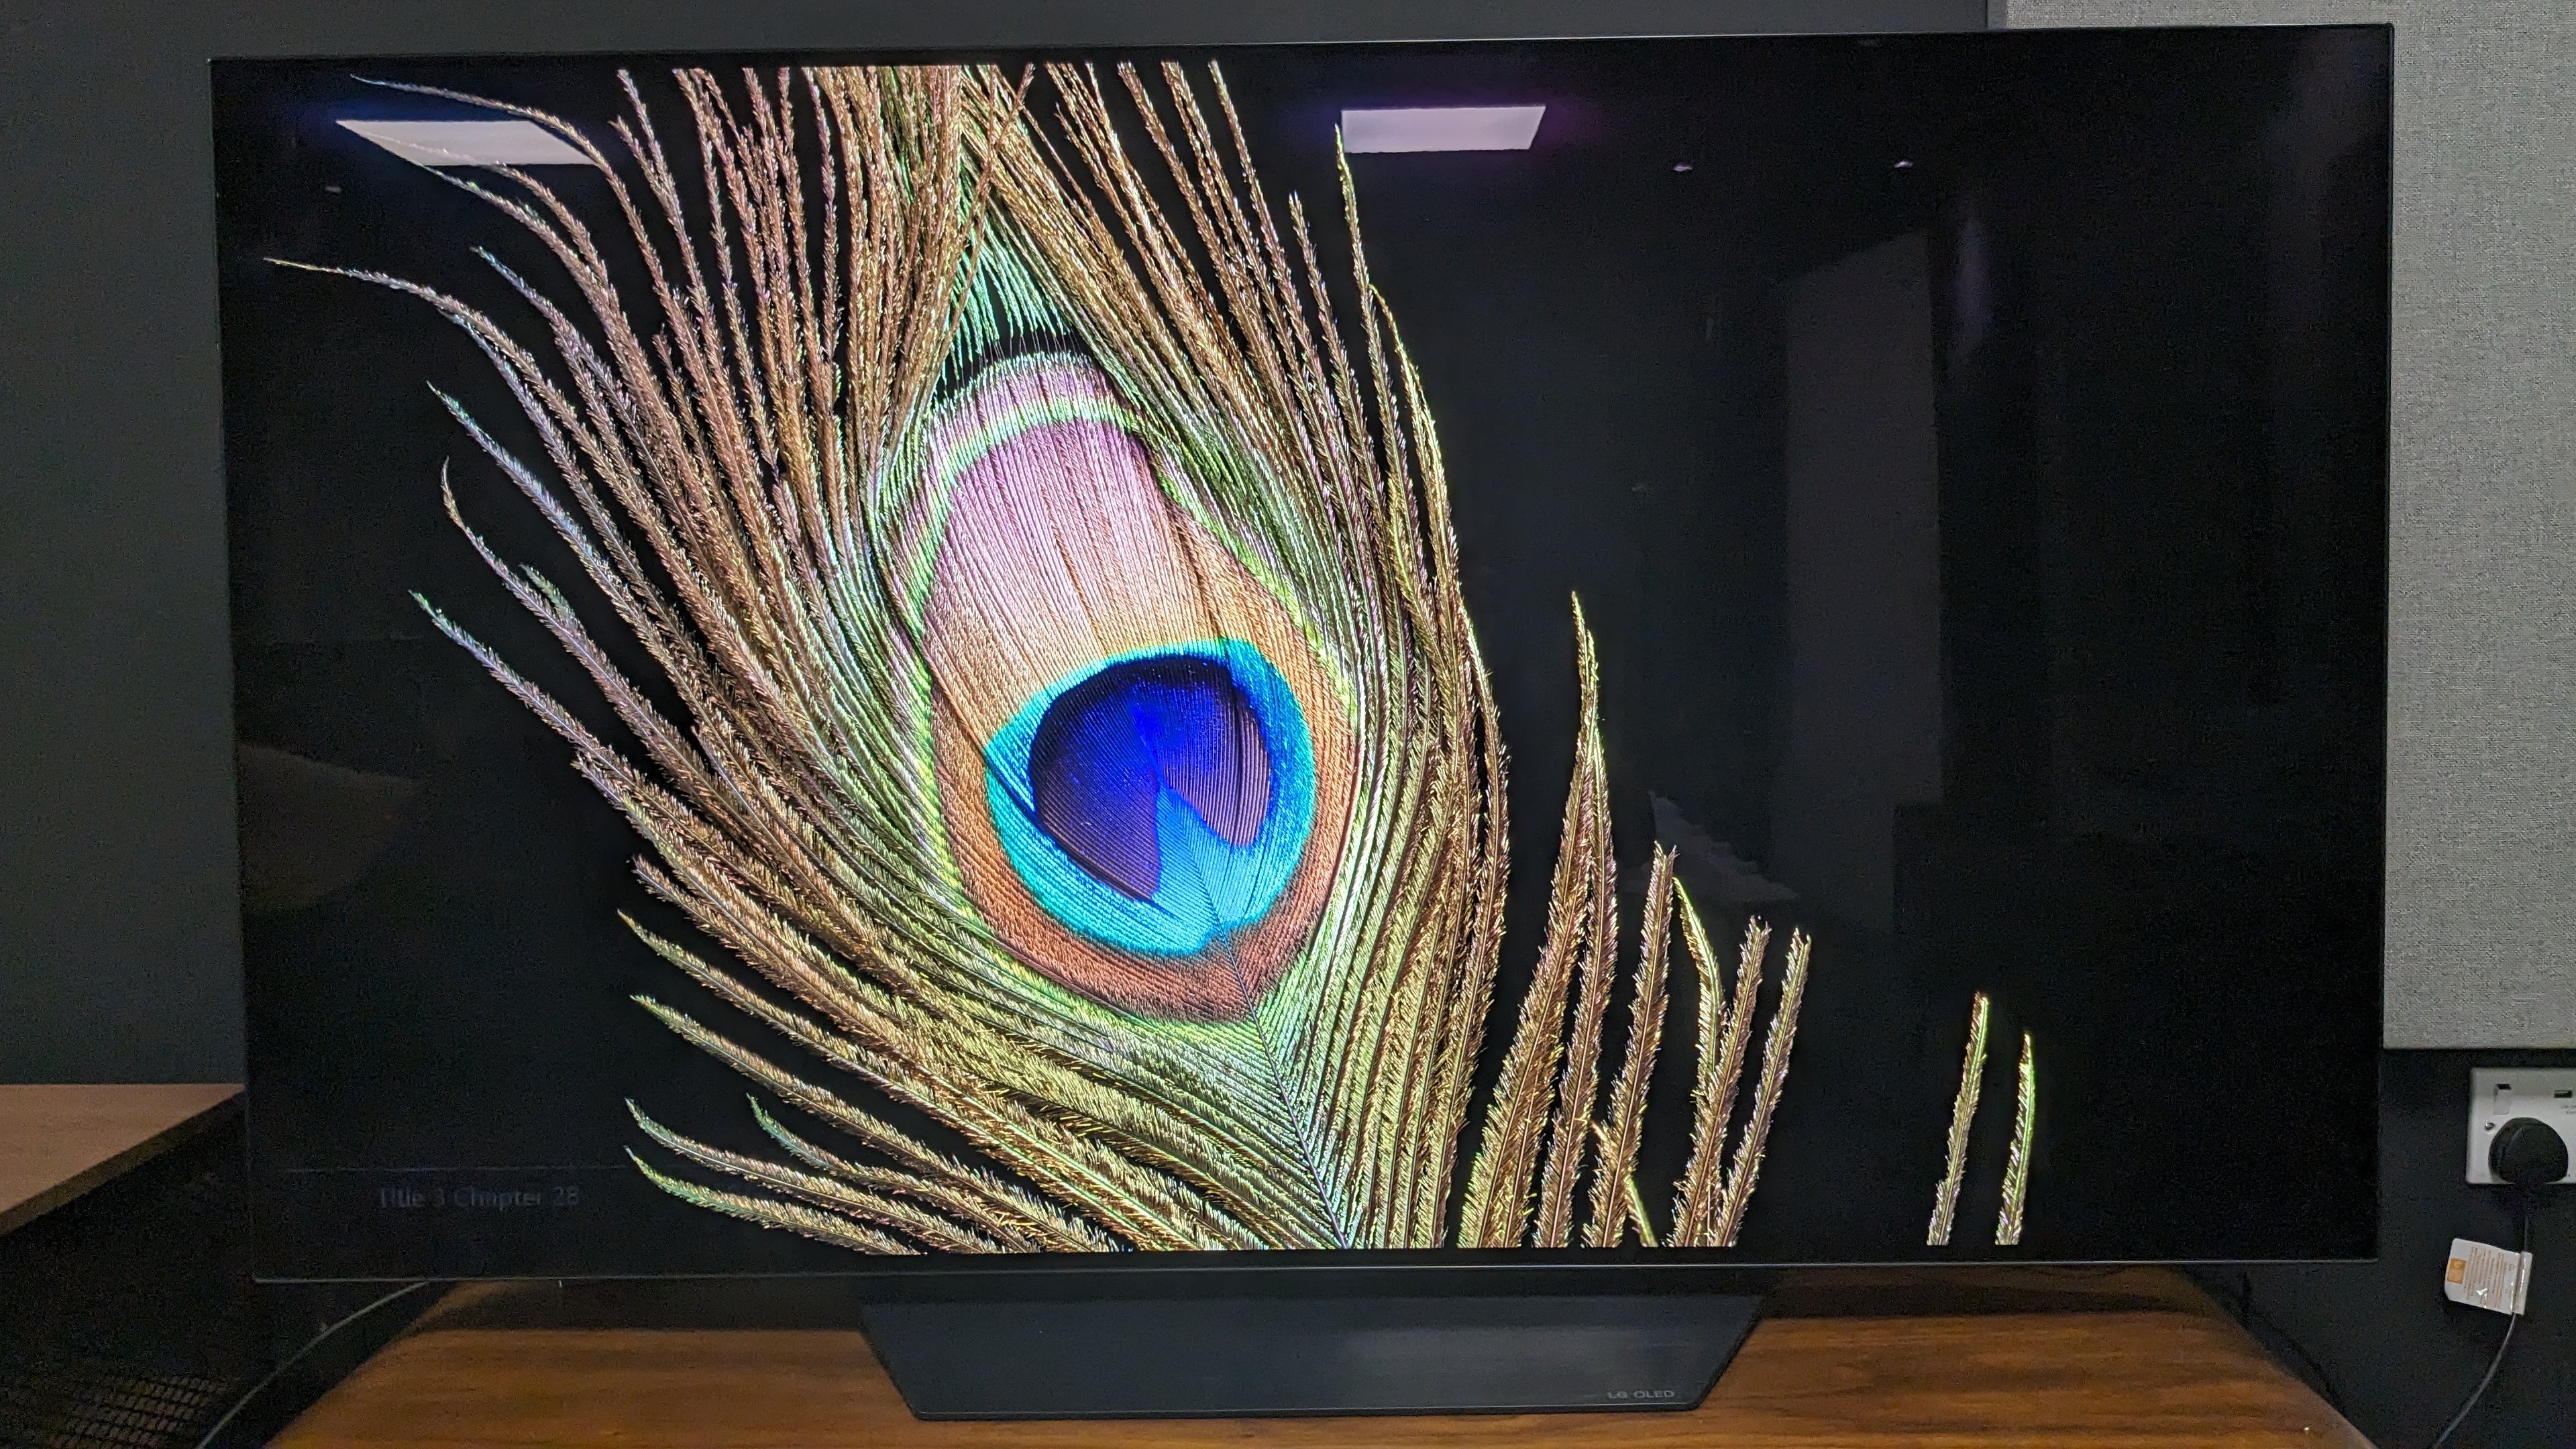 LG B3 TV with peacock feather on screen